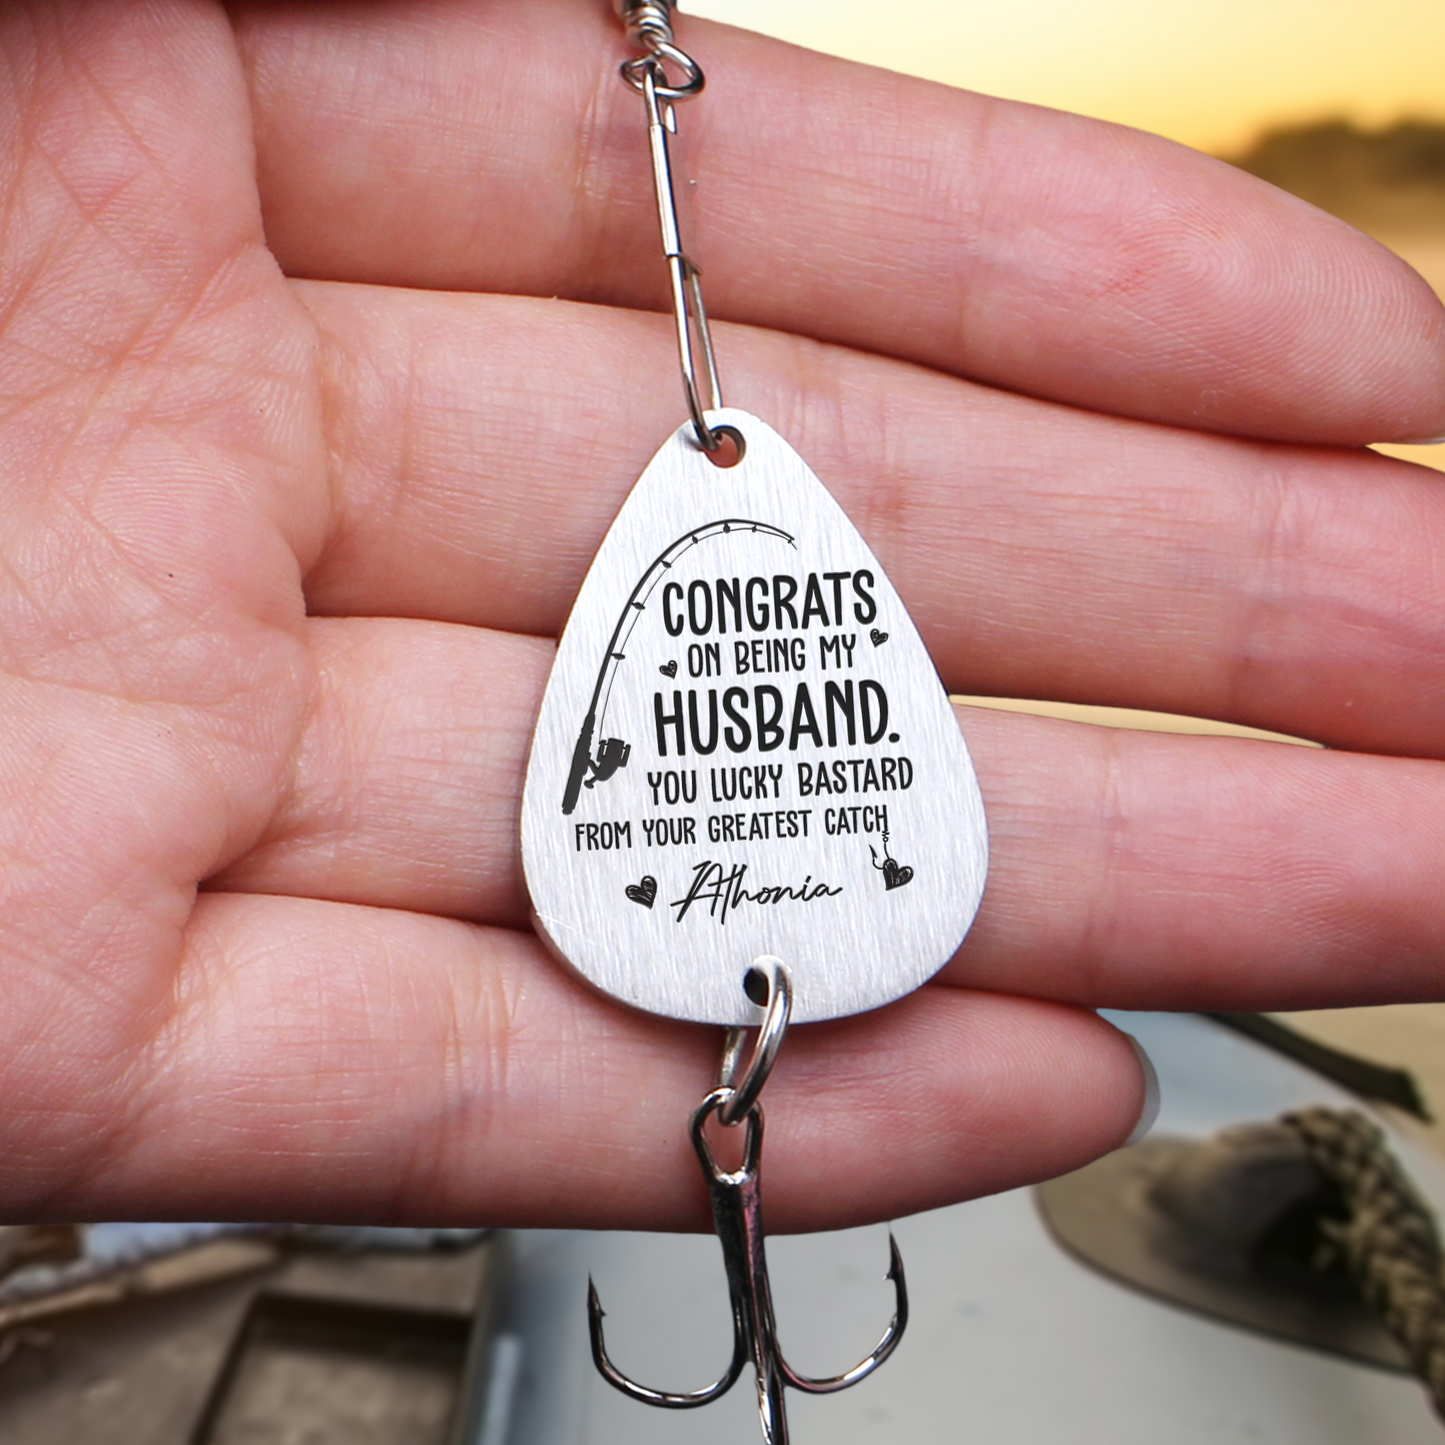 Congrats On Being My Husband You Lucky Bastard - Personalized Fishing Lure Keychain